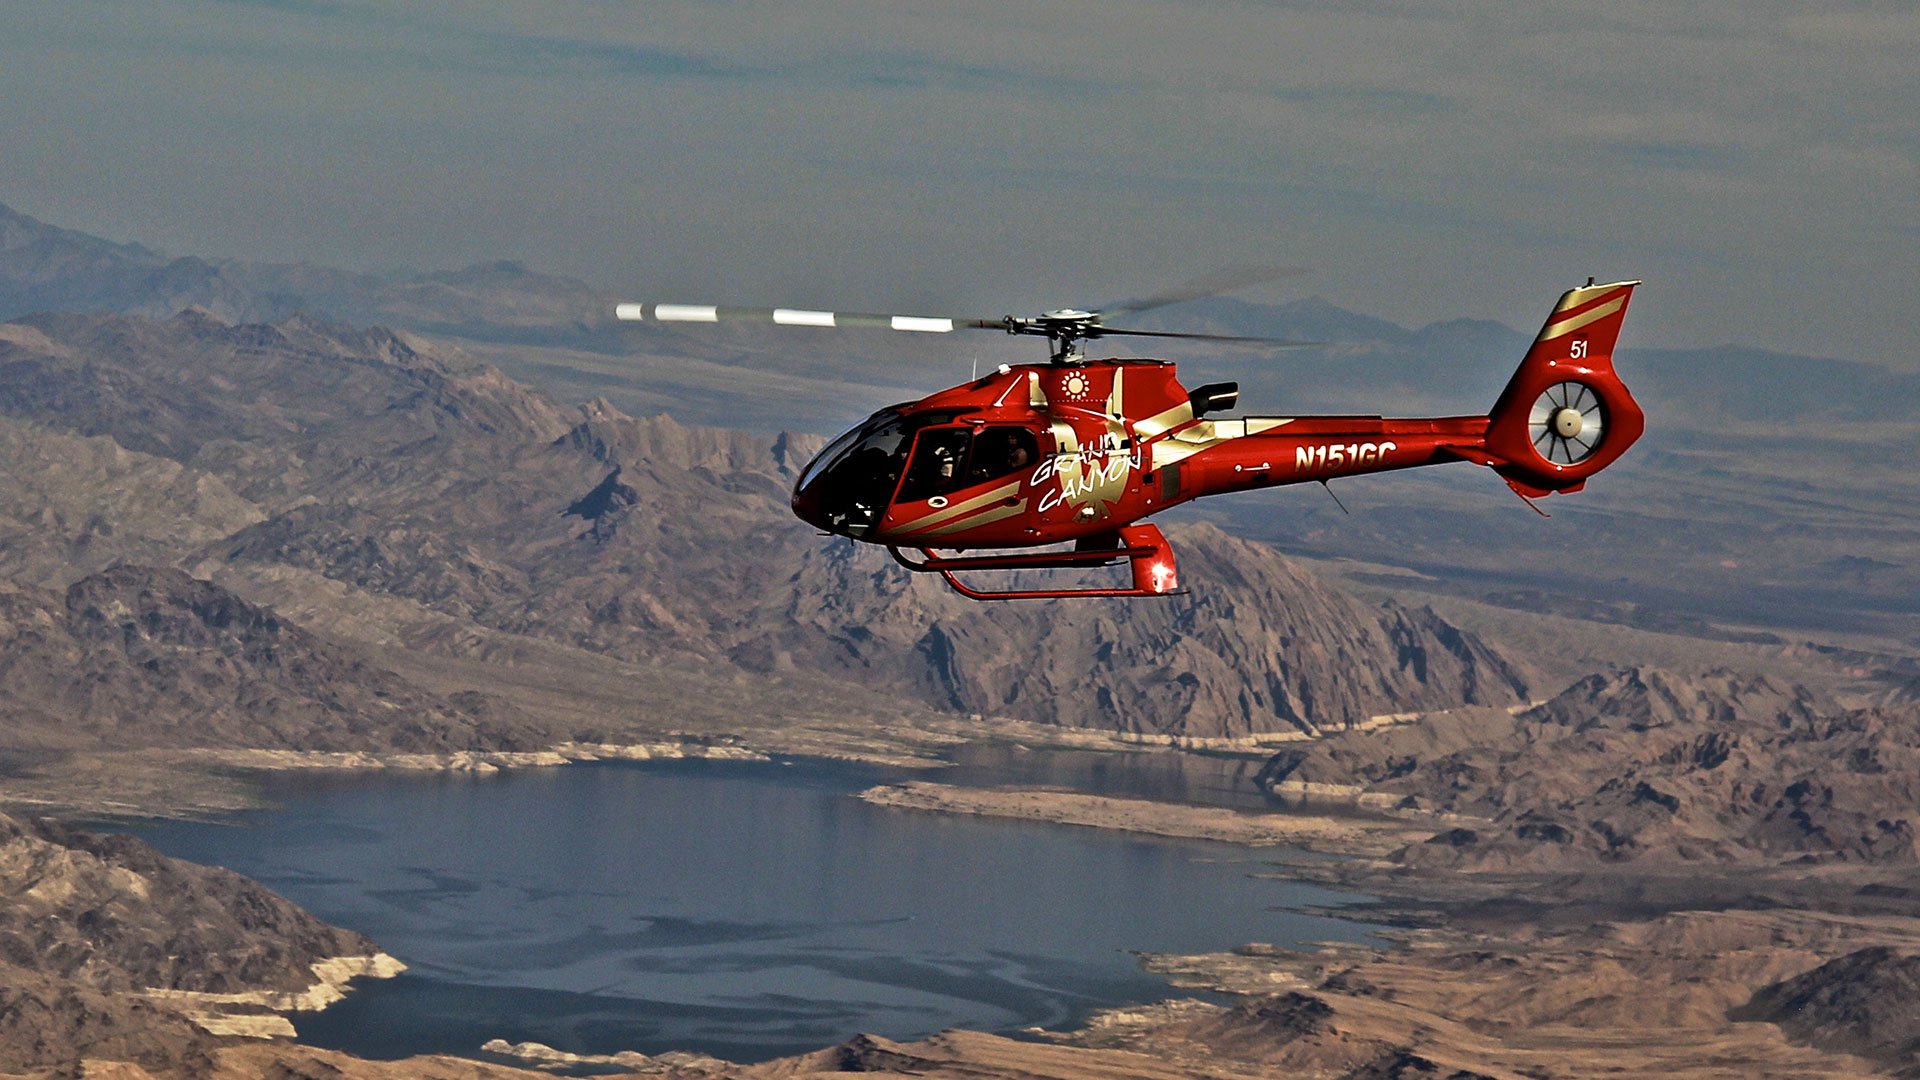 Red EC-130 helicopter flying over Lake Mead